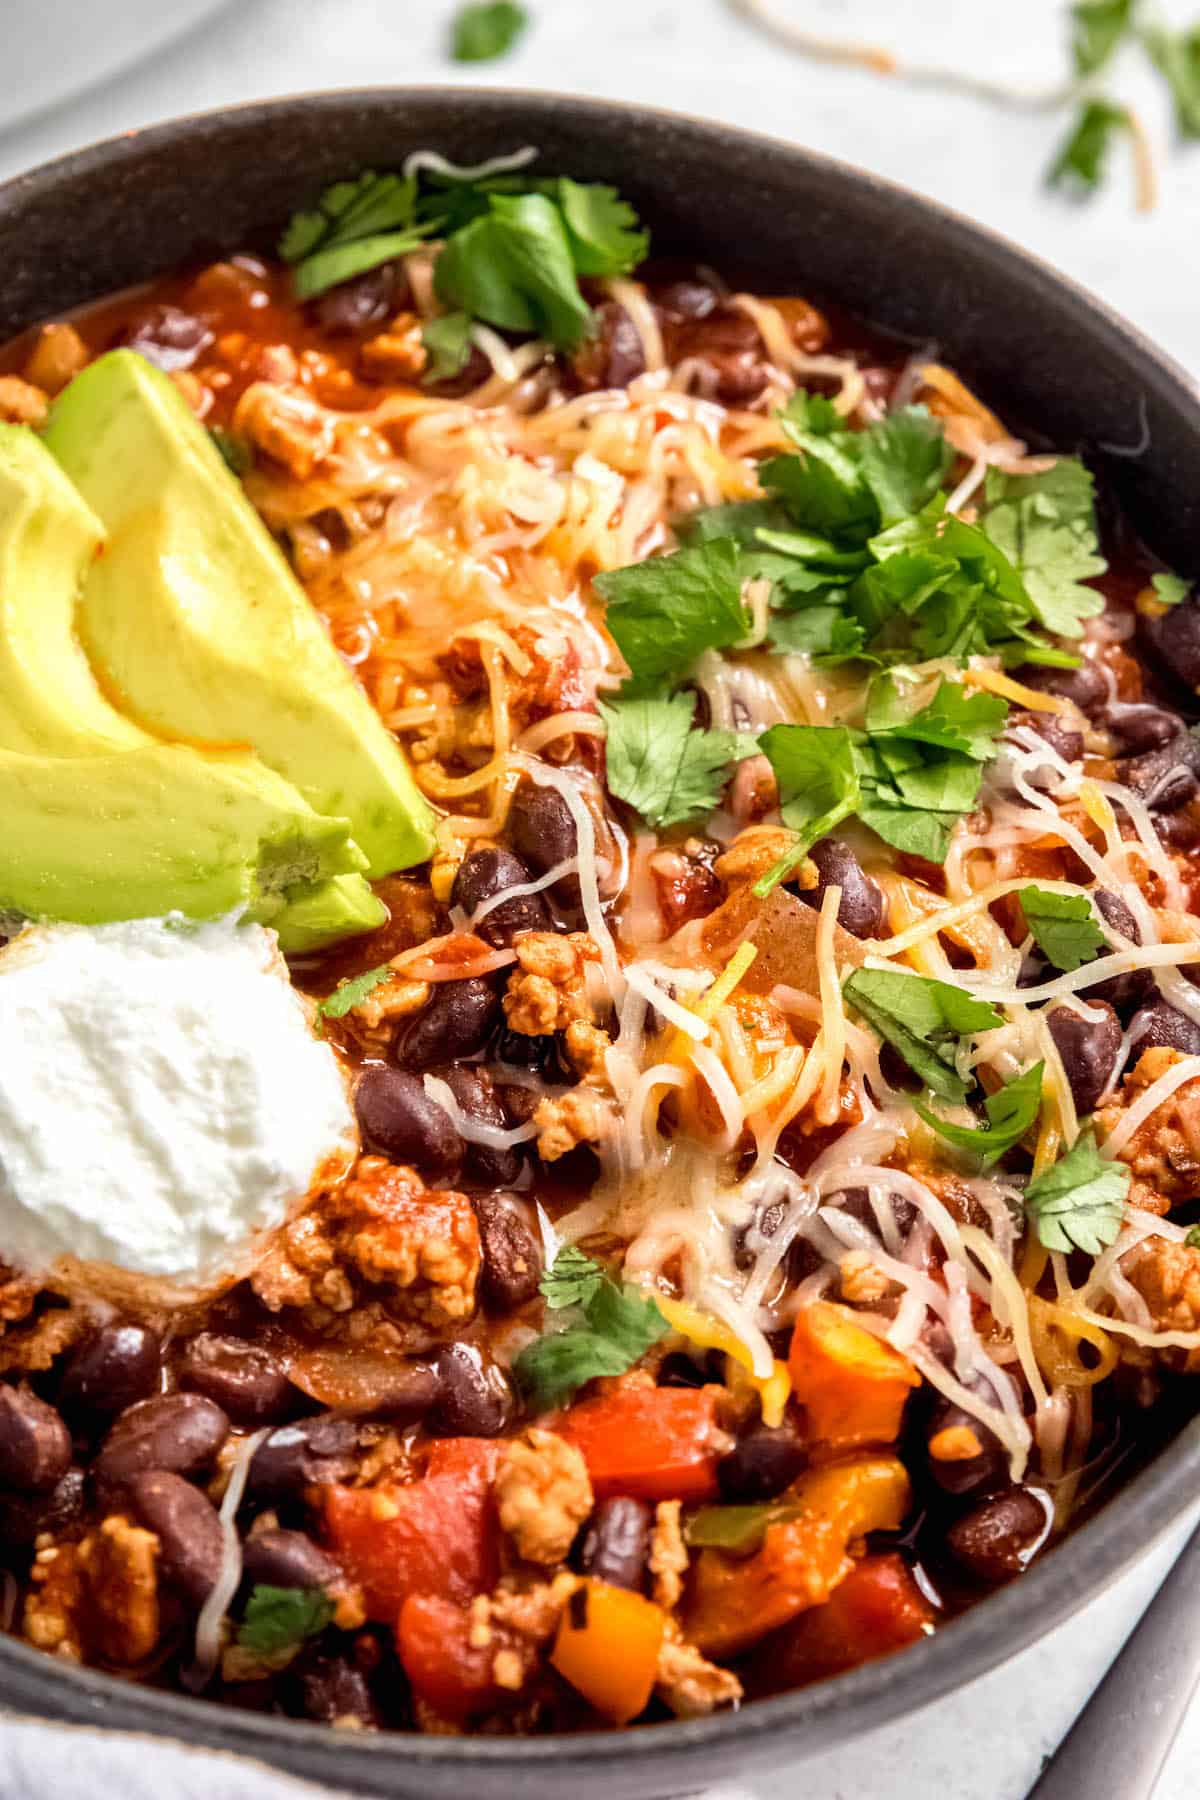 closeup shot of a bowl of chicken black bean chili with a dollop of sour cream, some sliced avocados, grated cheese, and chopped cilantro.